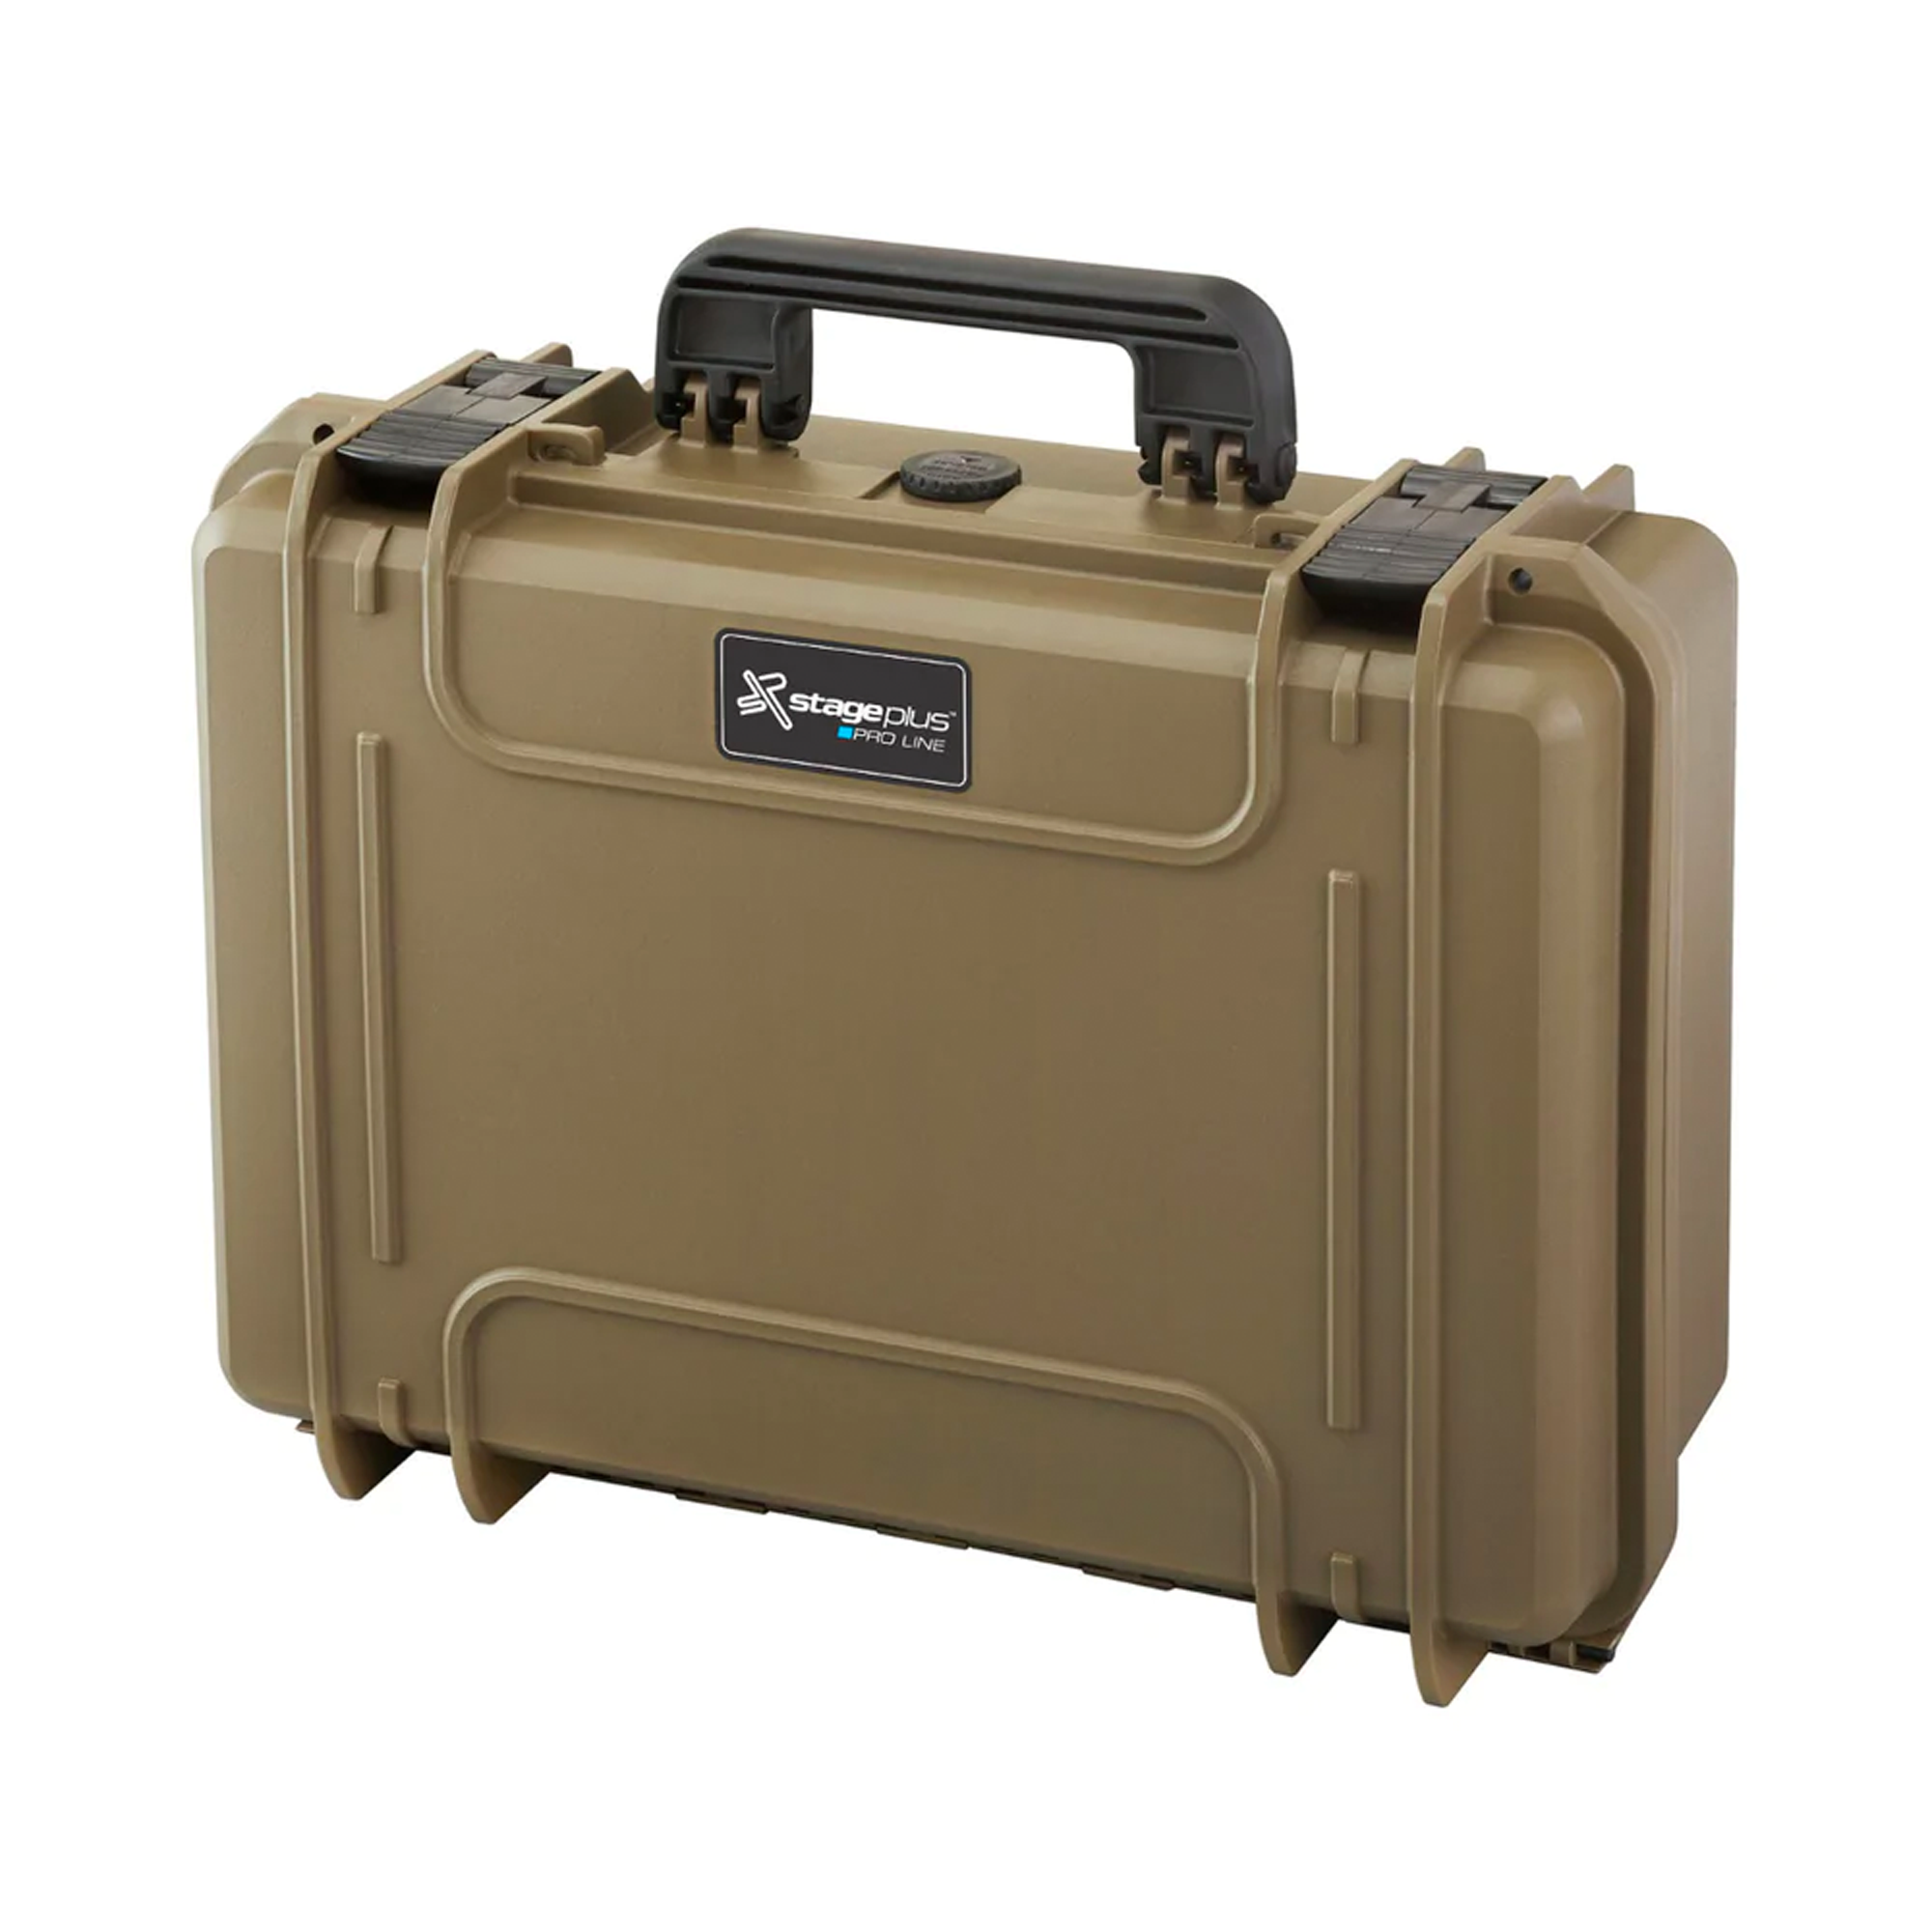 Stage Plus PRO 430CAM Sahara Carry Case, Padded Dividers, ID: L426xW290xH159mm